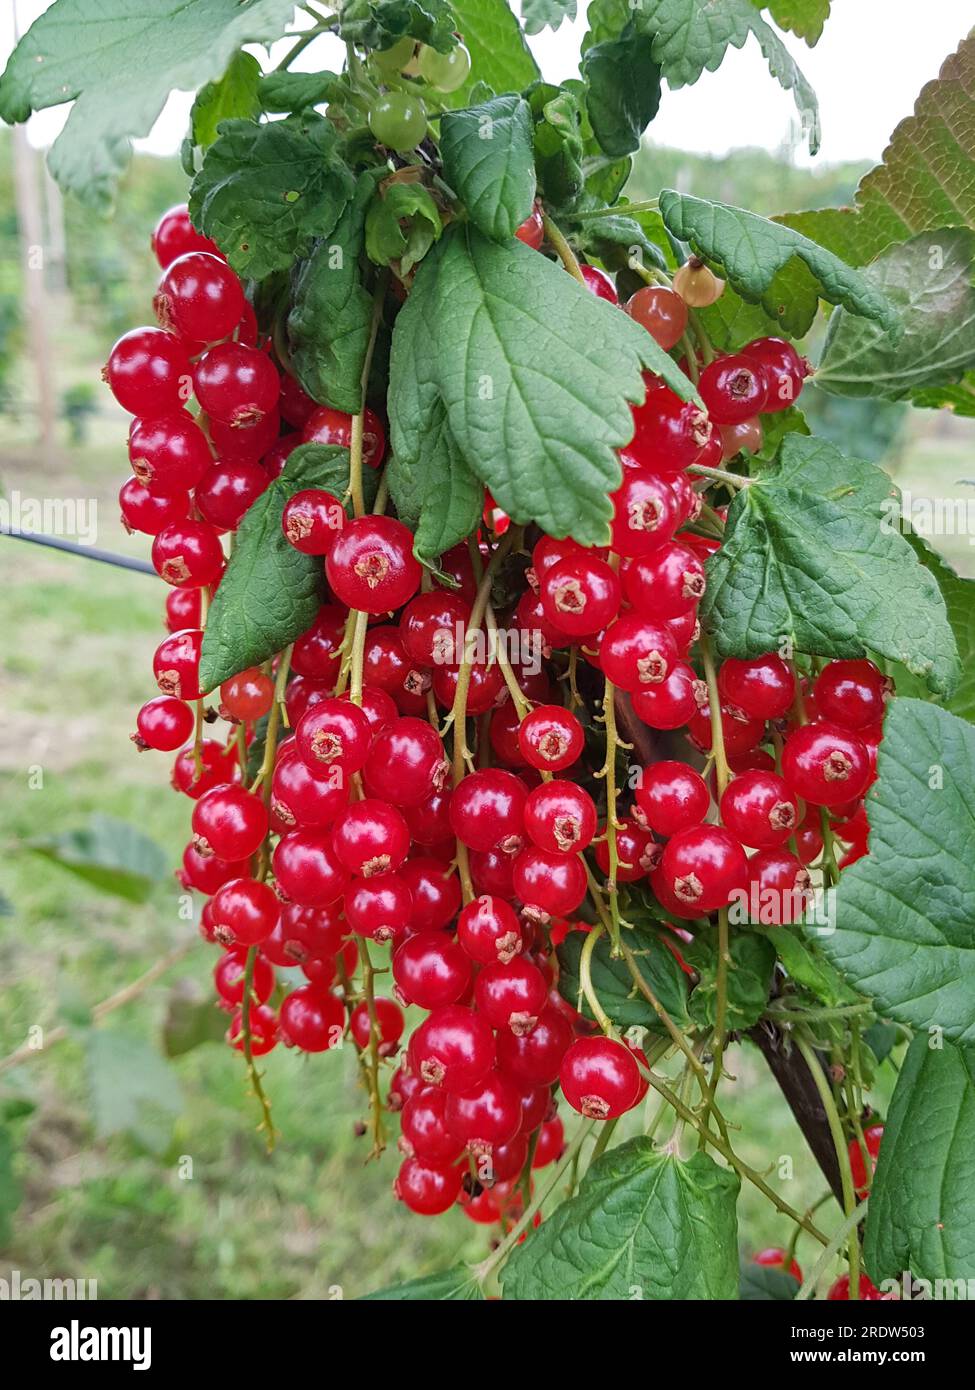 A cluster with panicles of fully ripe red currants, Ribes rubrum, on the bush Stock Photo